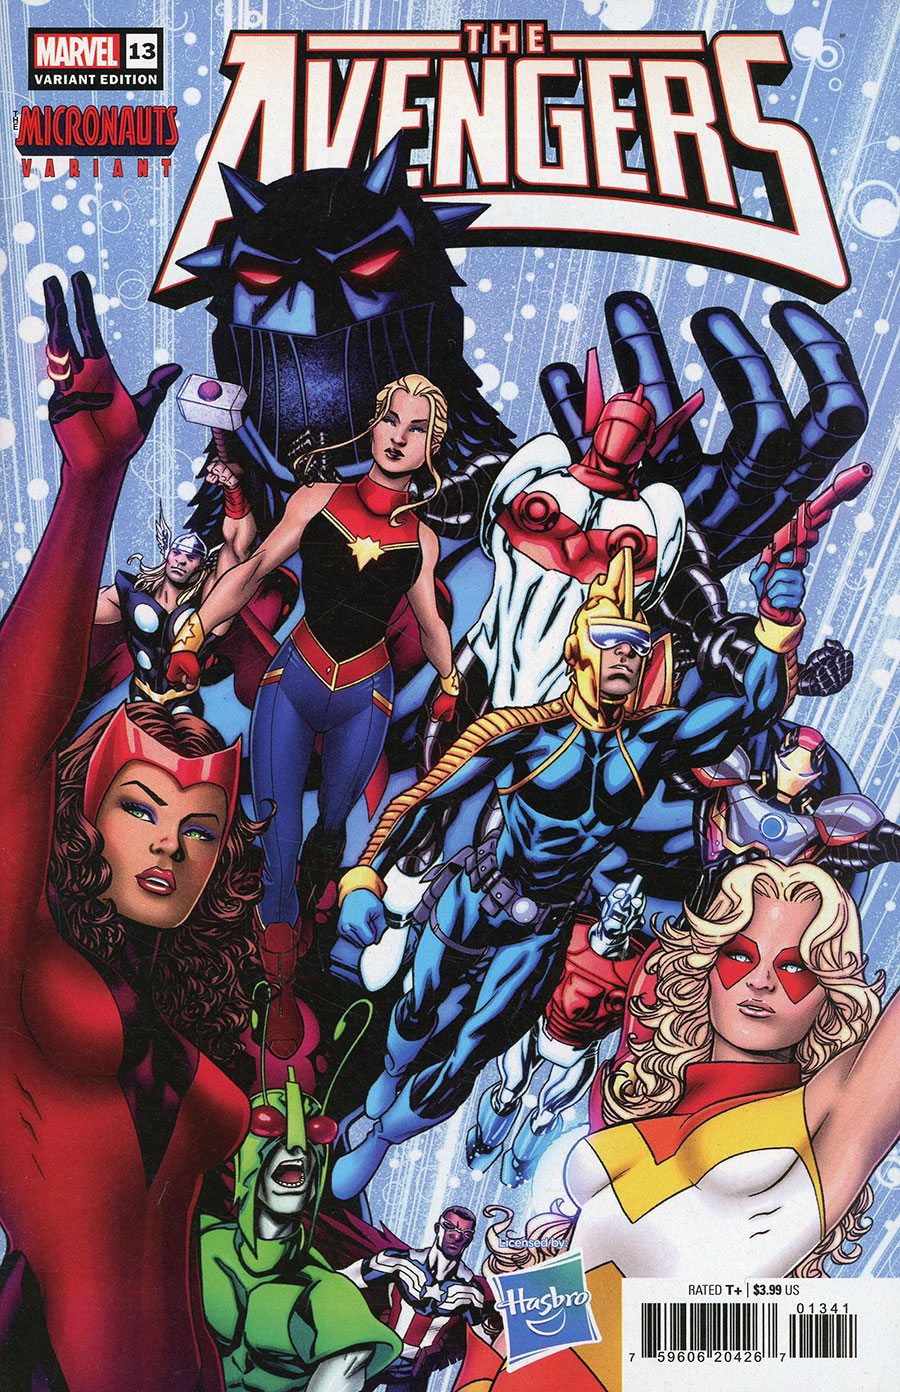 Avengers Vol 8 #13 Cover B Variant Mike McKone Micronauts Cover (Fall Of The House Of X Tie-In)